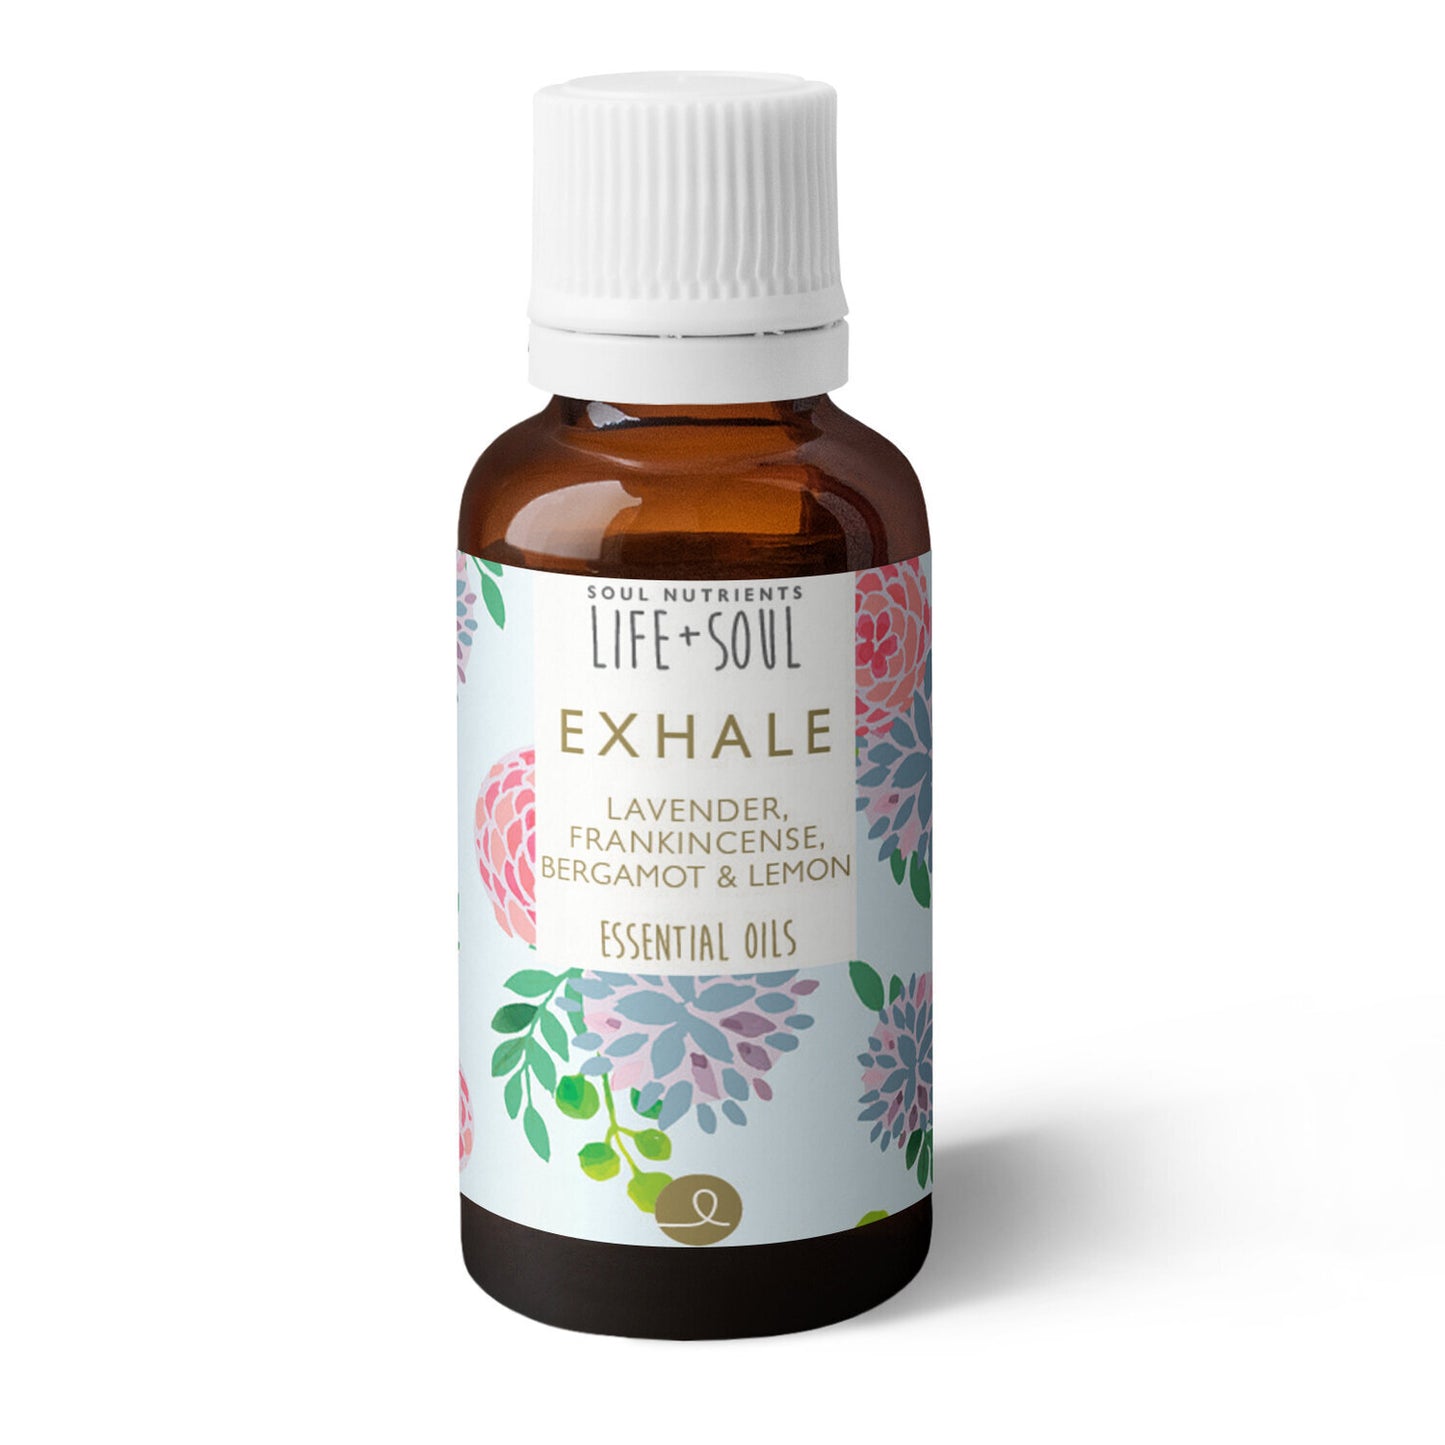 INHALE &amp; EXHALE DUO- 2 x 10ml Essential Oil Blends